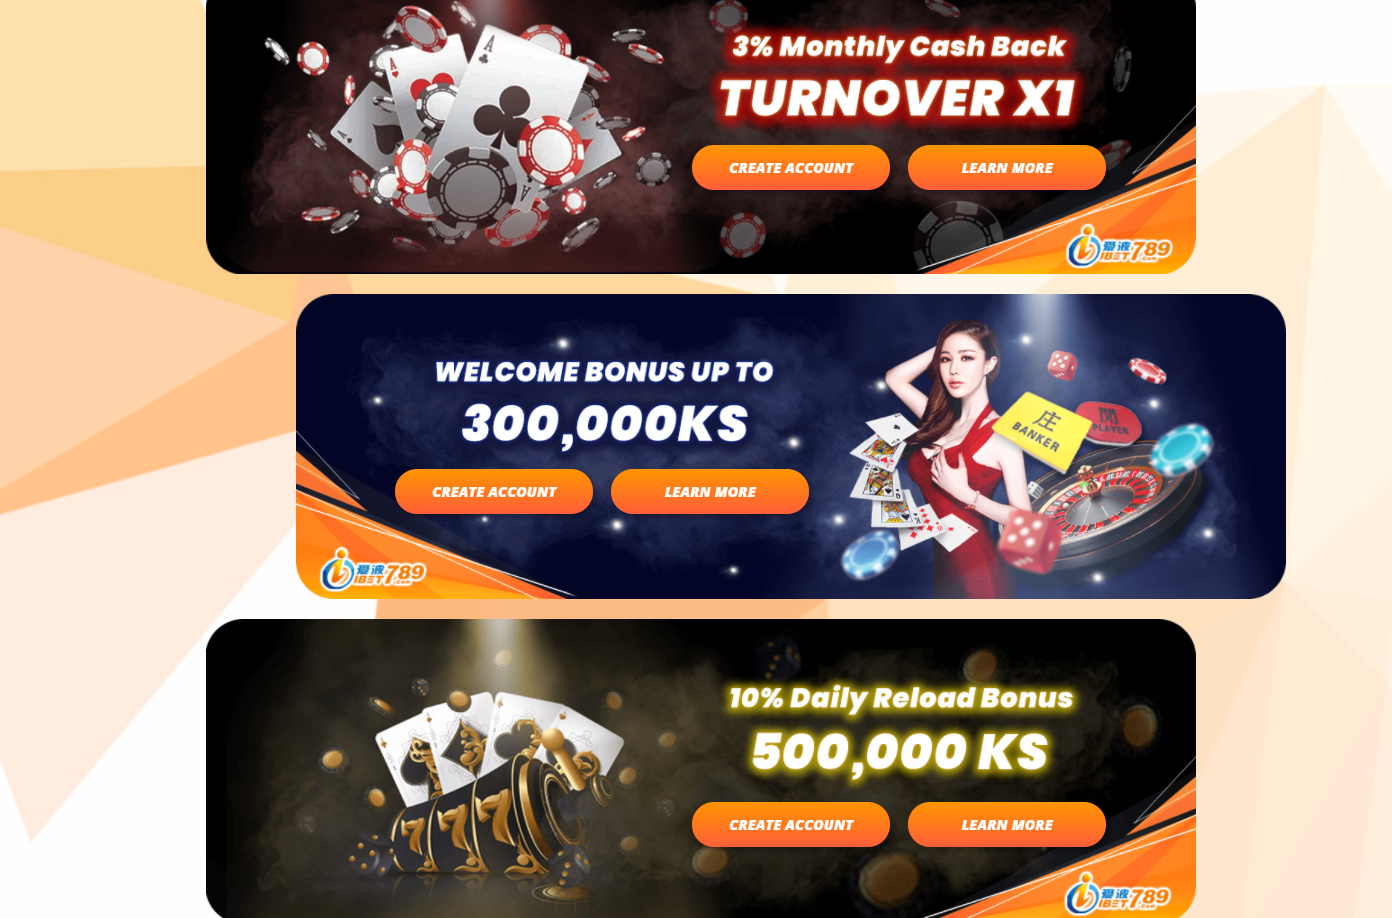 Bonuses and promotions iBet789